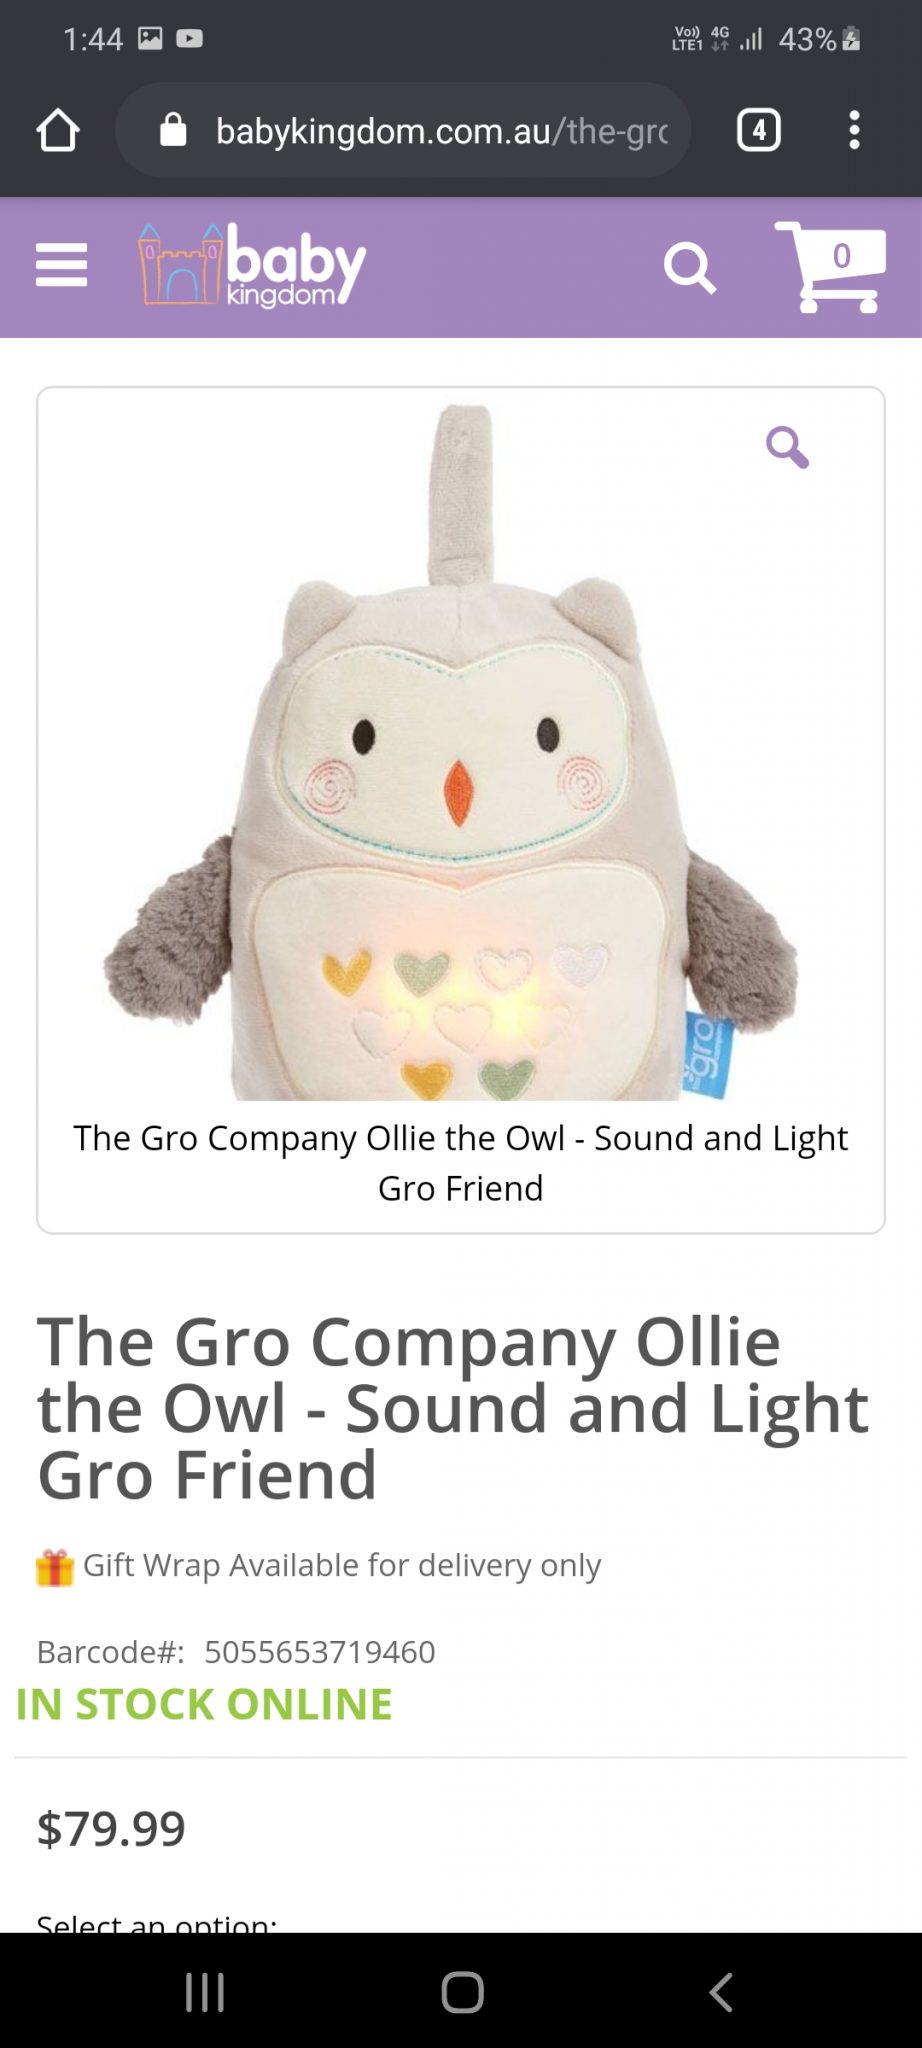 The gro can't Ollie the owl sound and light from friend